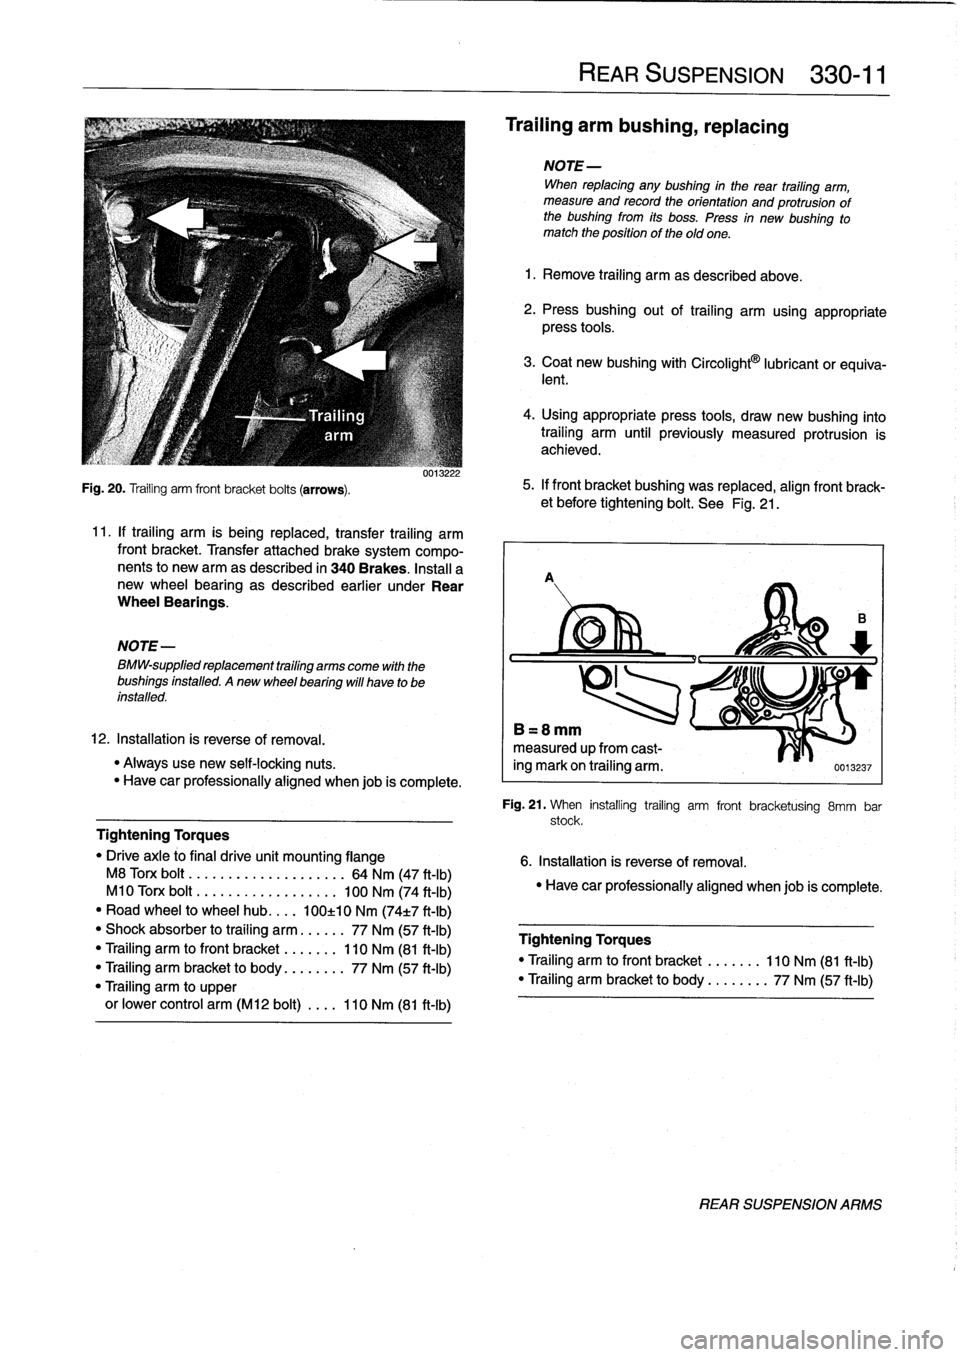 BMW 323i 1993 E36 Owners Guide 
Fig
.
20
.
Trailing
arm
front
bracket
bolts
(arrows)
.

NOTE-

BMW-supplied
replacement
trailing
arms
come
with
the
bushings
installed
.
Anew
wheel
bearing
will
have
to
be
installed
.

0013222

11
.
